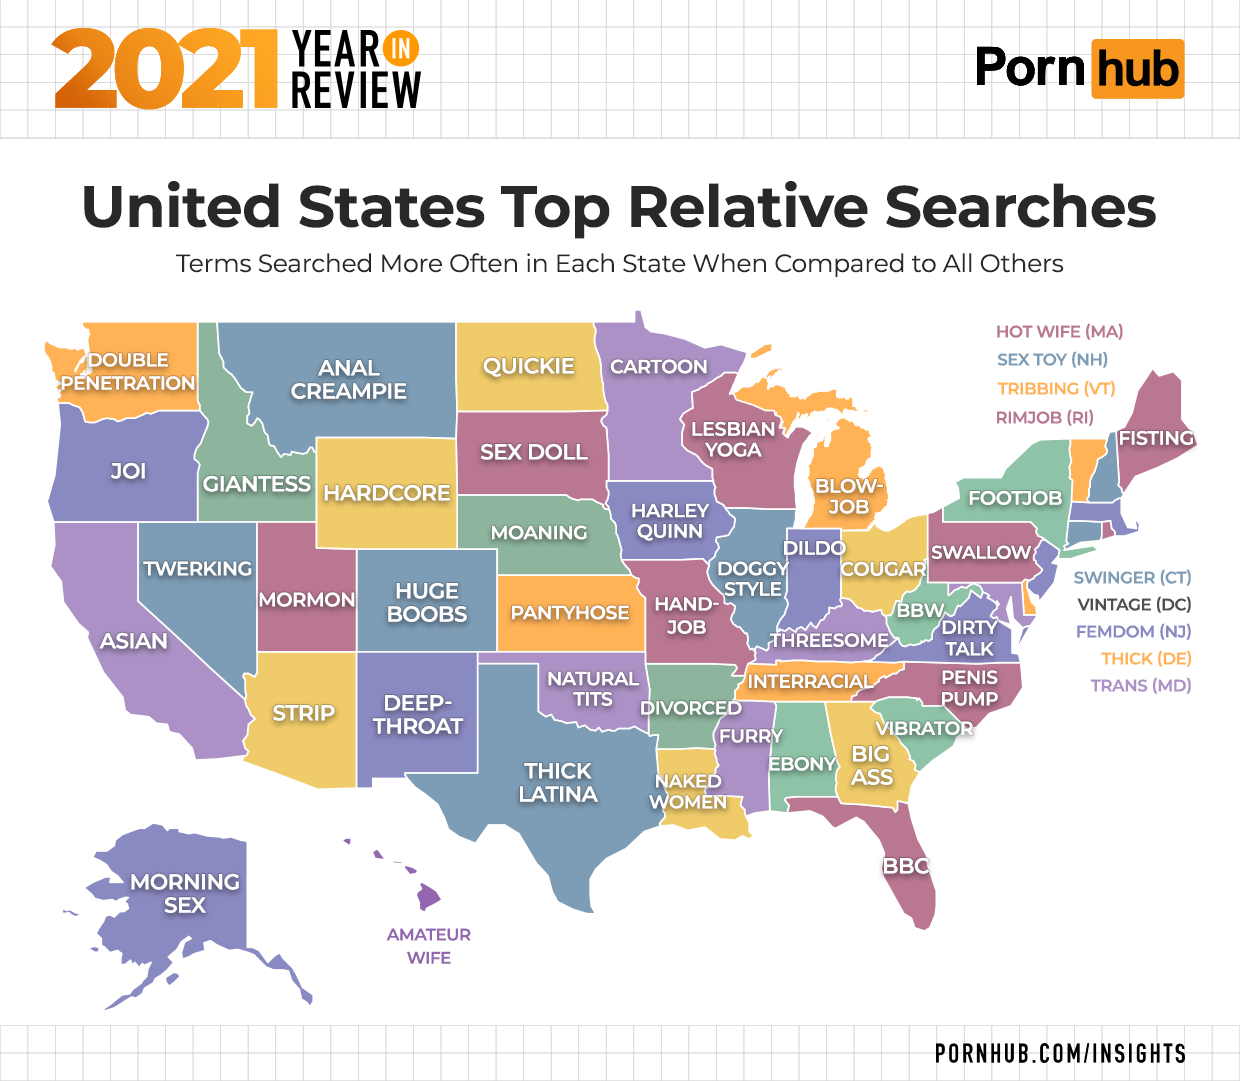 Memphis Flyer Pornhub Tennessee Likes “Interracial” and Stays for Awhile